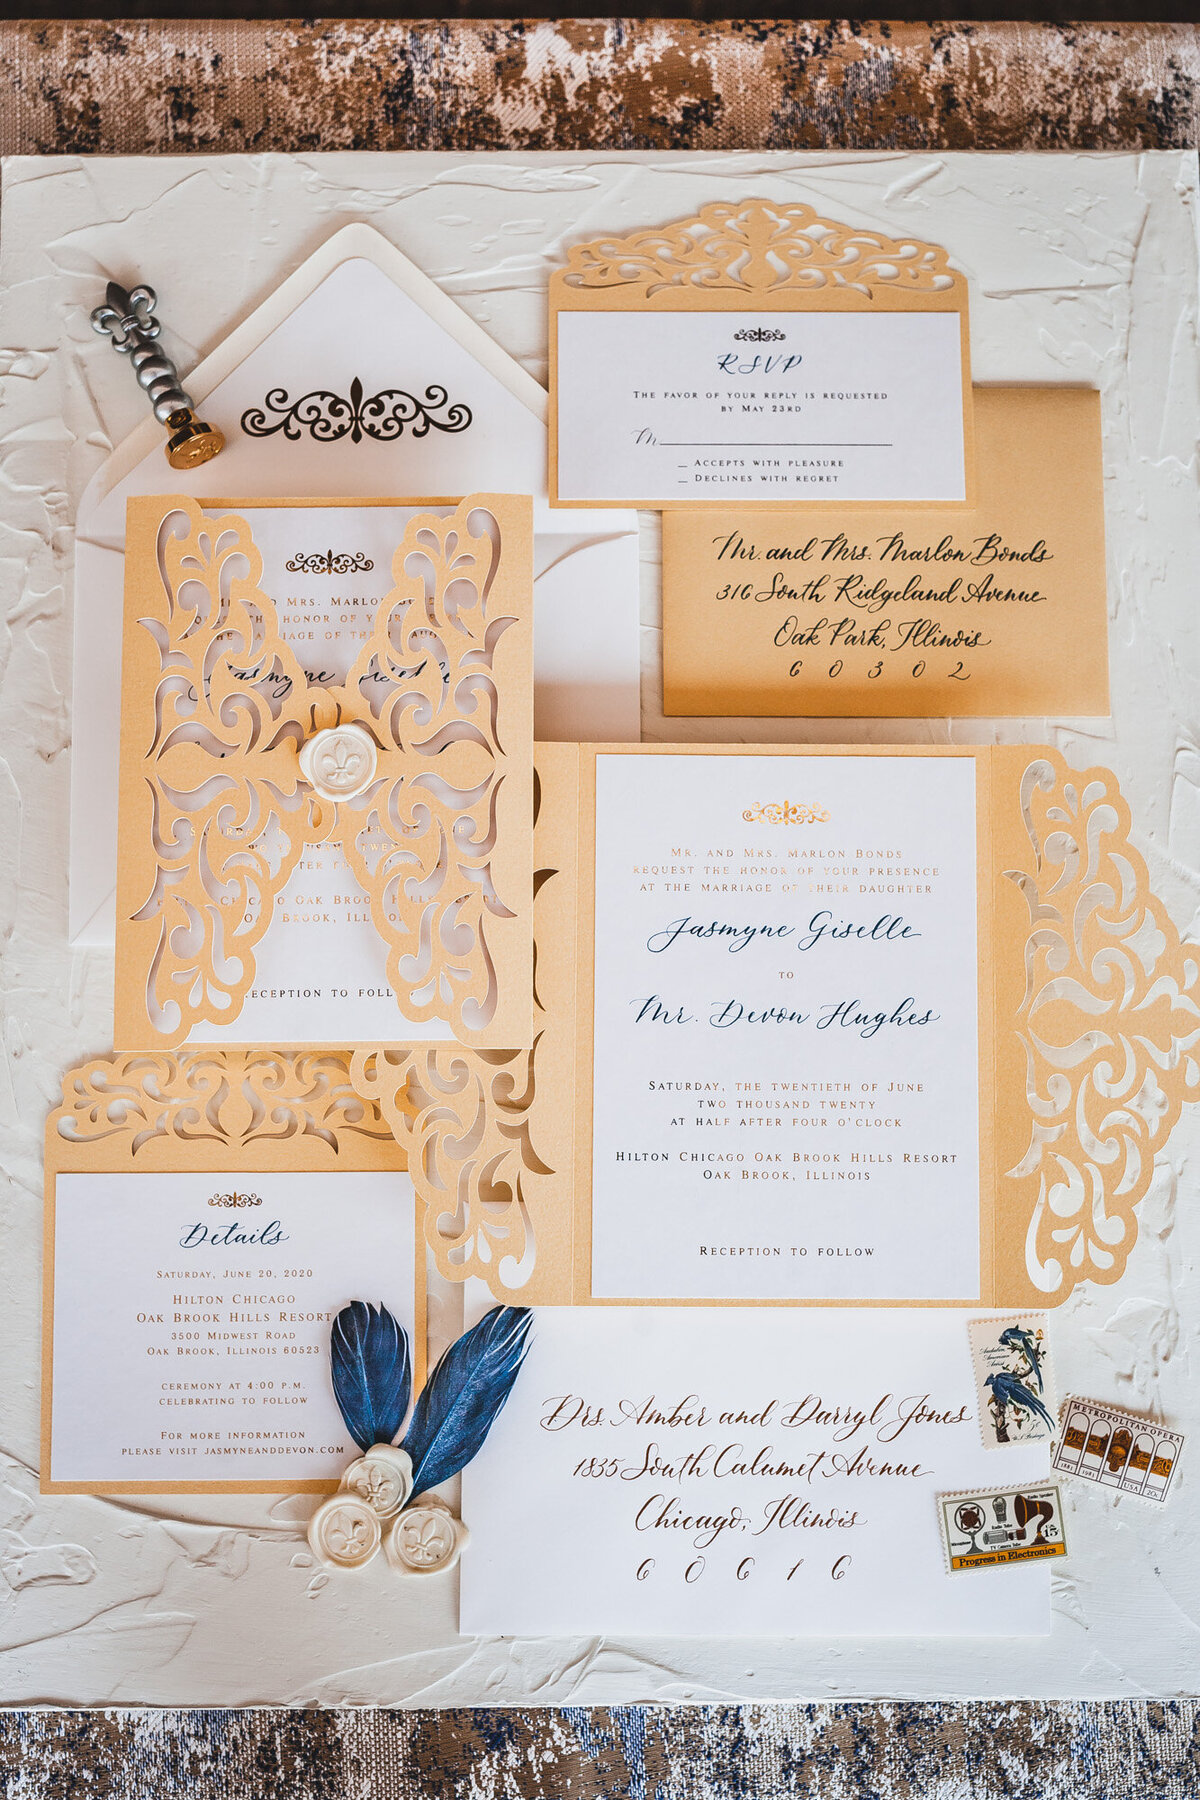 Wedding invitation details with wax seal